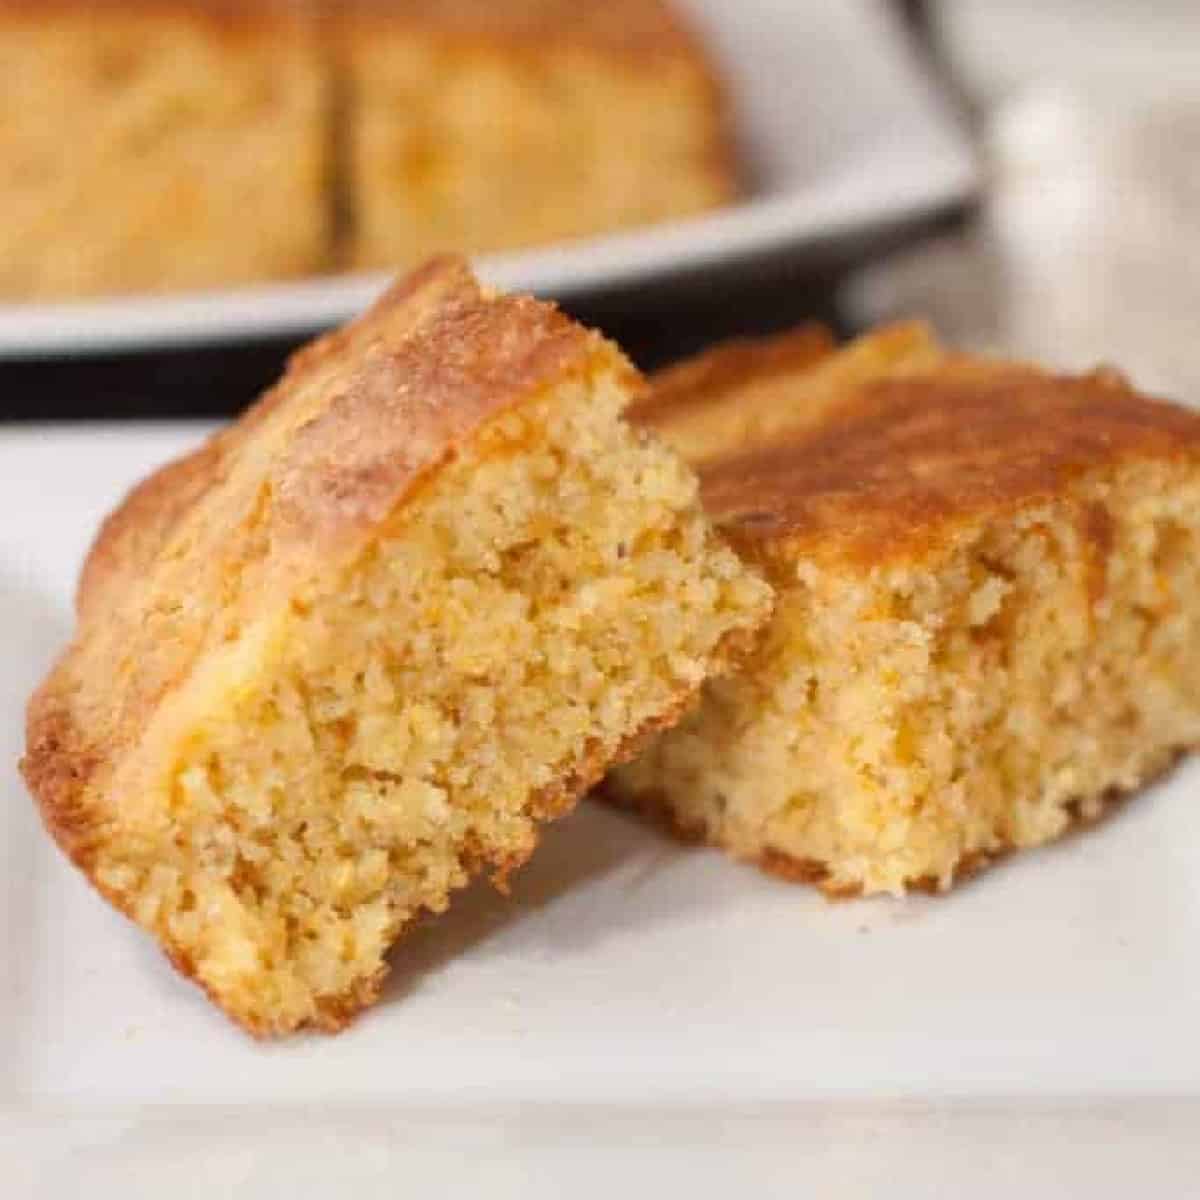 two pieces of cornbread on a plate.